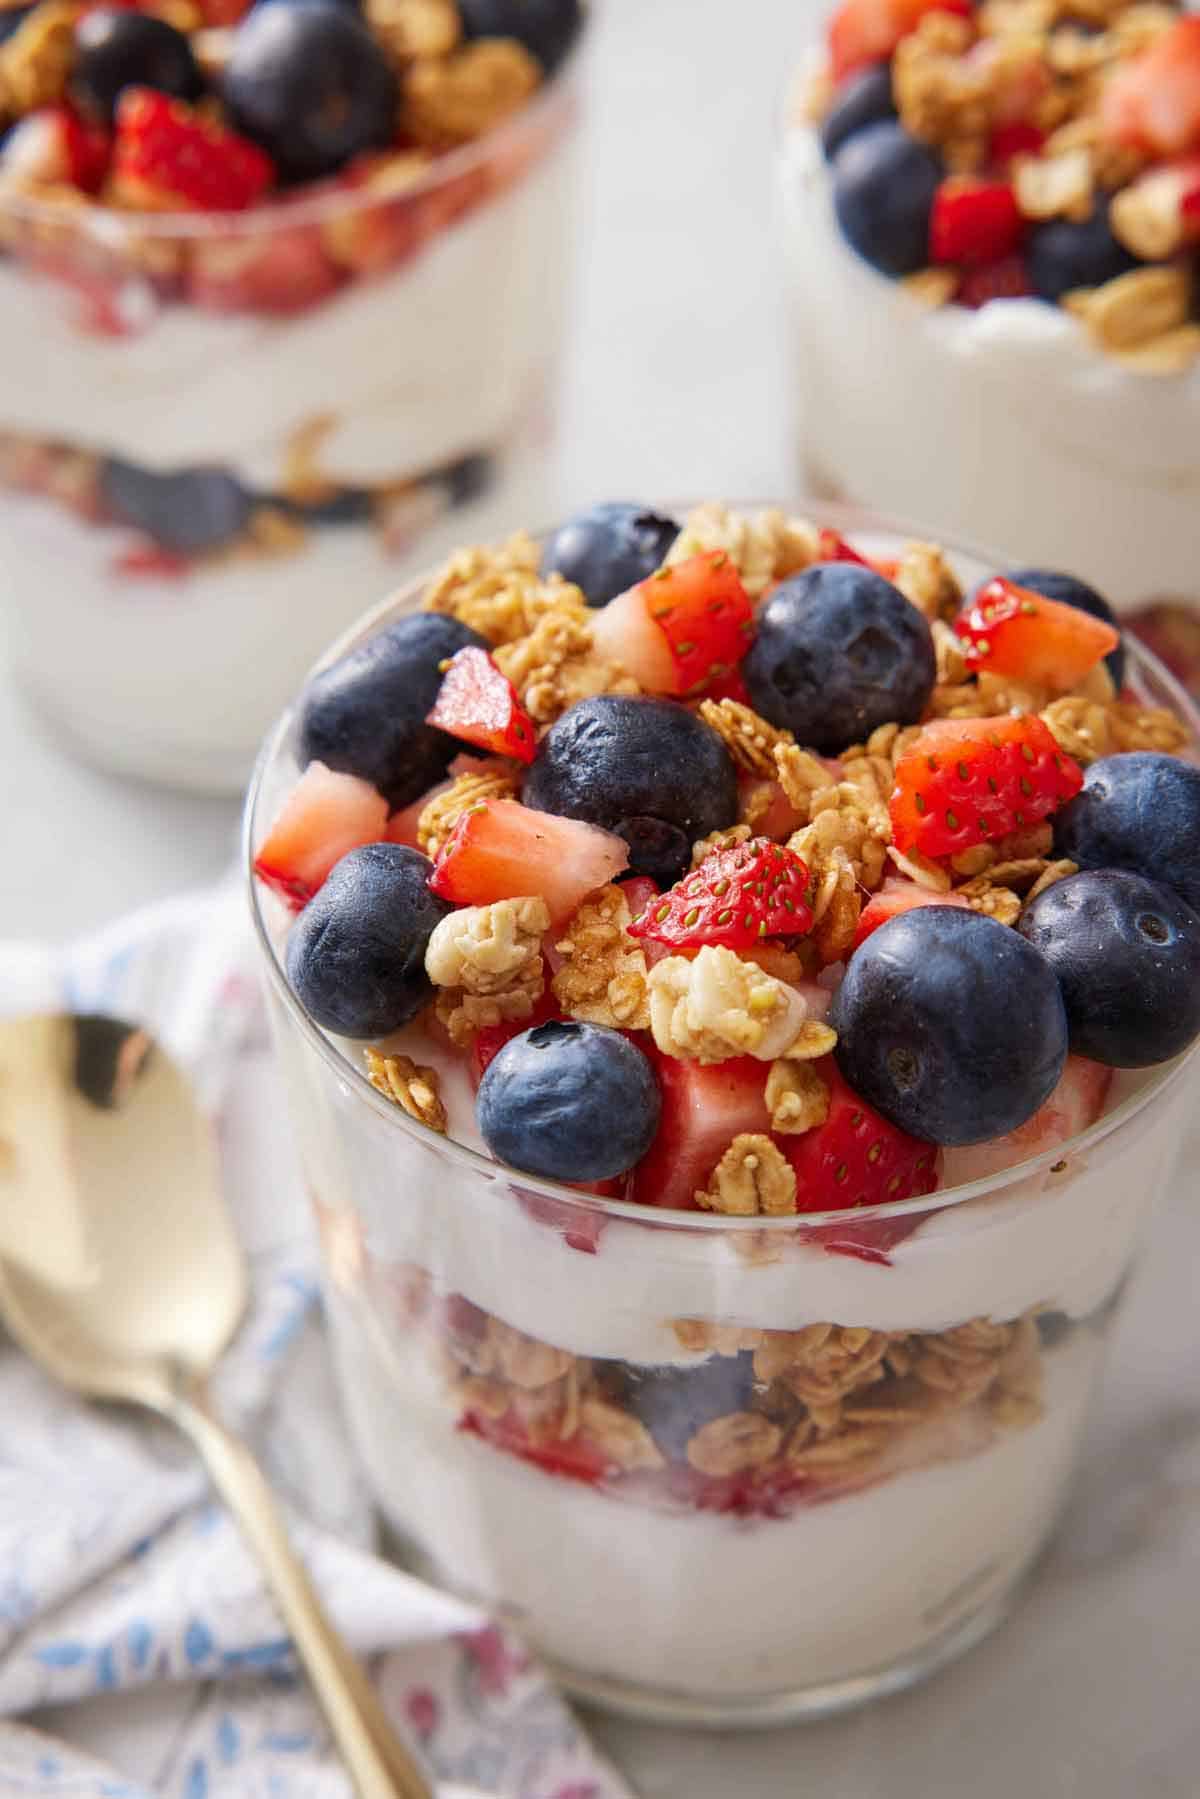 A slightly overhead view of a glass of yogurt parfait with two more in the background and a spoon on the side.